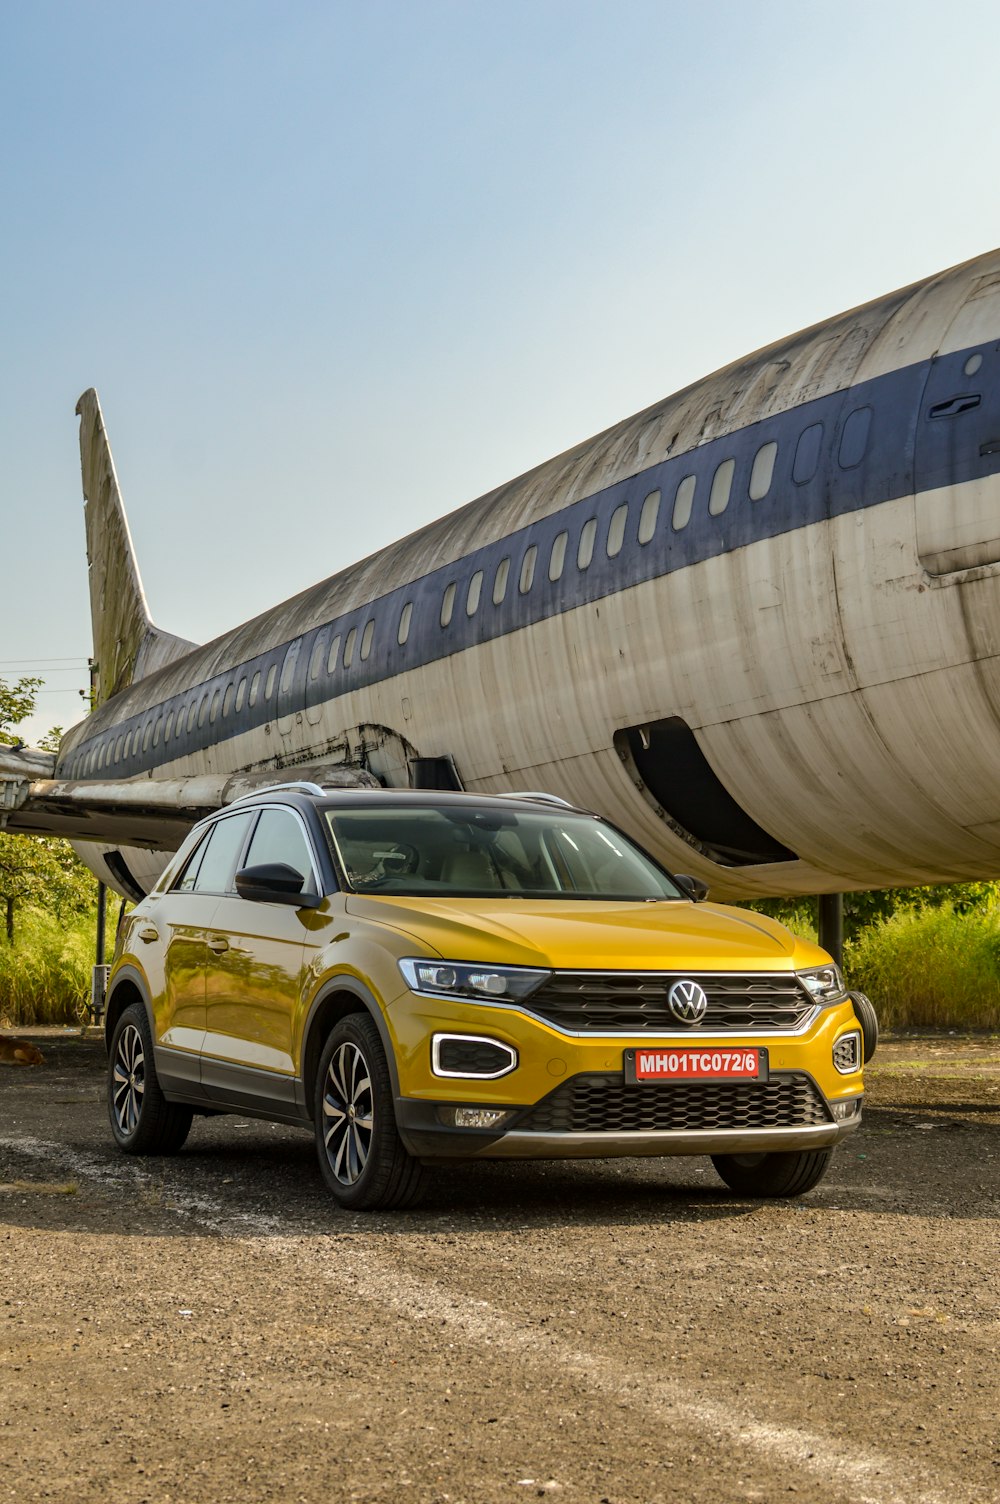 a yellow volkswagen suv parked in front of an airplane